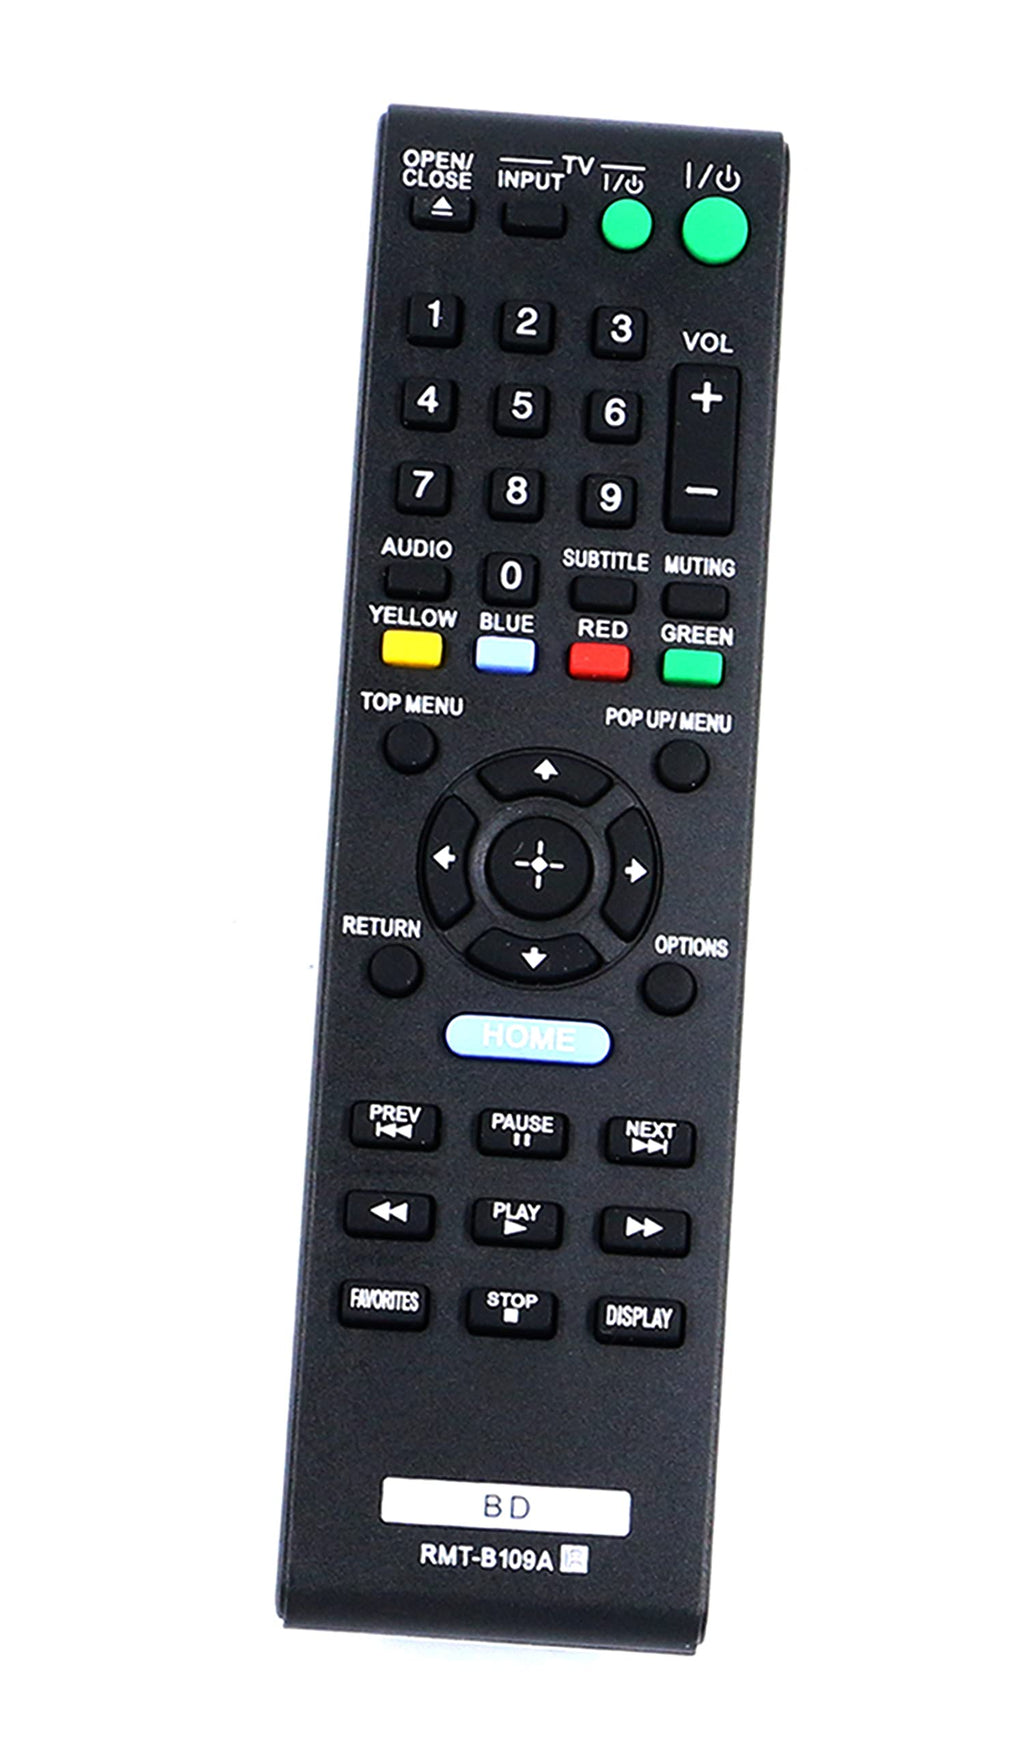 New RMT-B109A Replace Remote fit for Sony DVD Player BDP-S380 BDP-S580 BDP-S480 BDP-BX38 BDP-S280 BDP-S383 148939911 1-489-399-11 BD Blu-ray DVD Players - LeoForward Australia